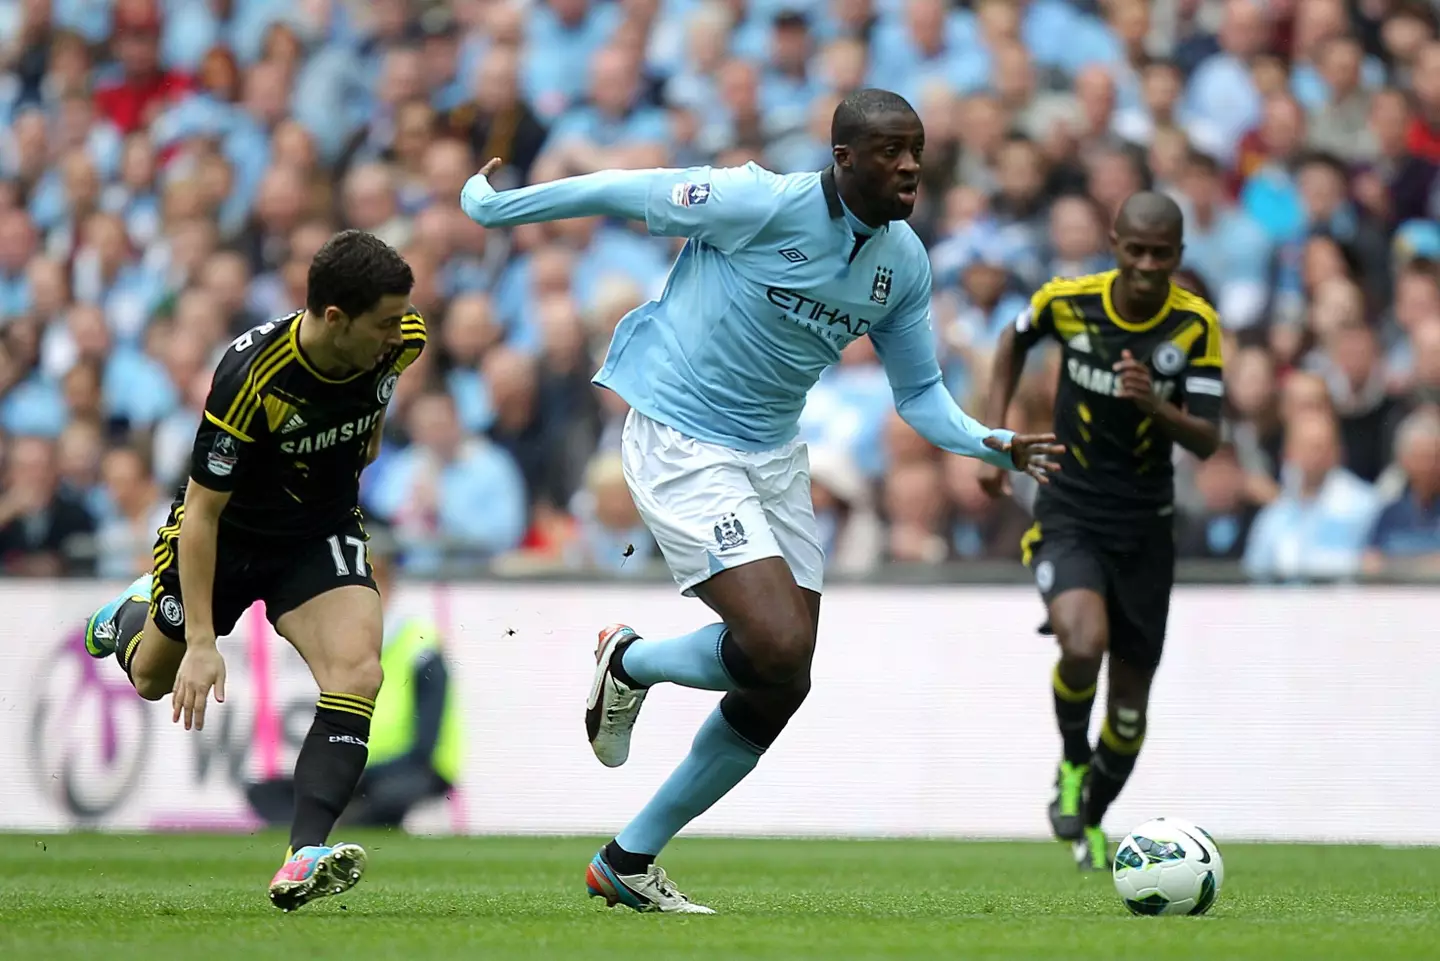 Toure and Hazard during their time at Manchester City and Chelsea. (Image